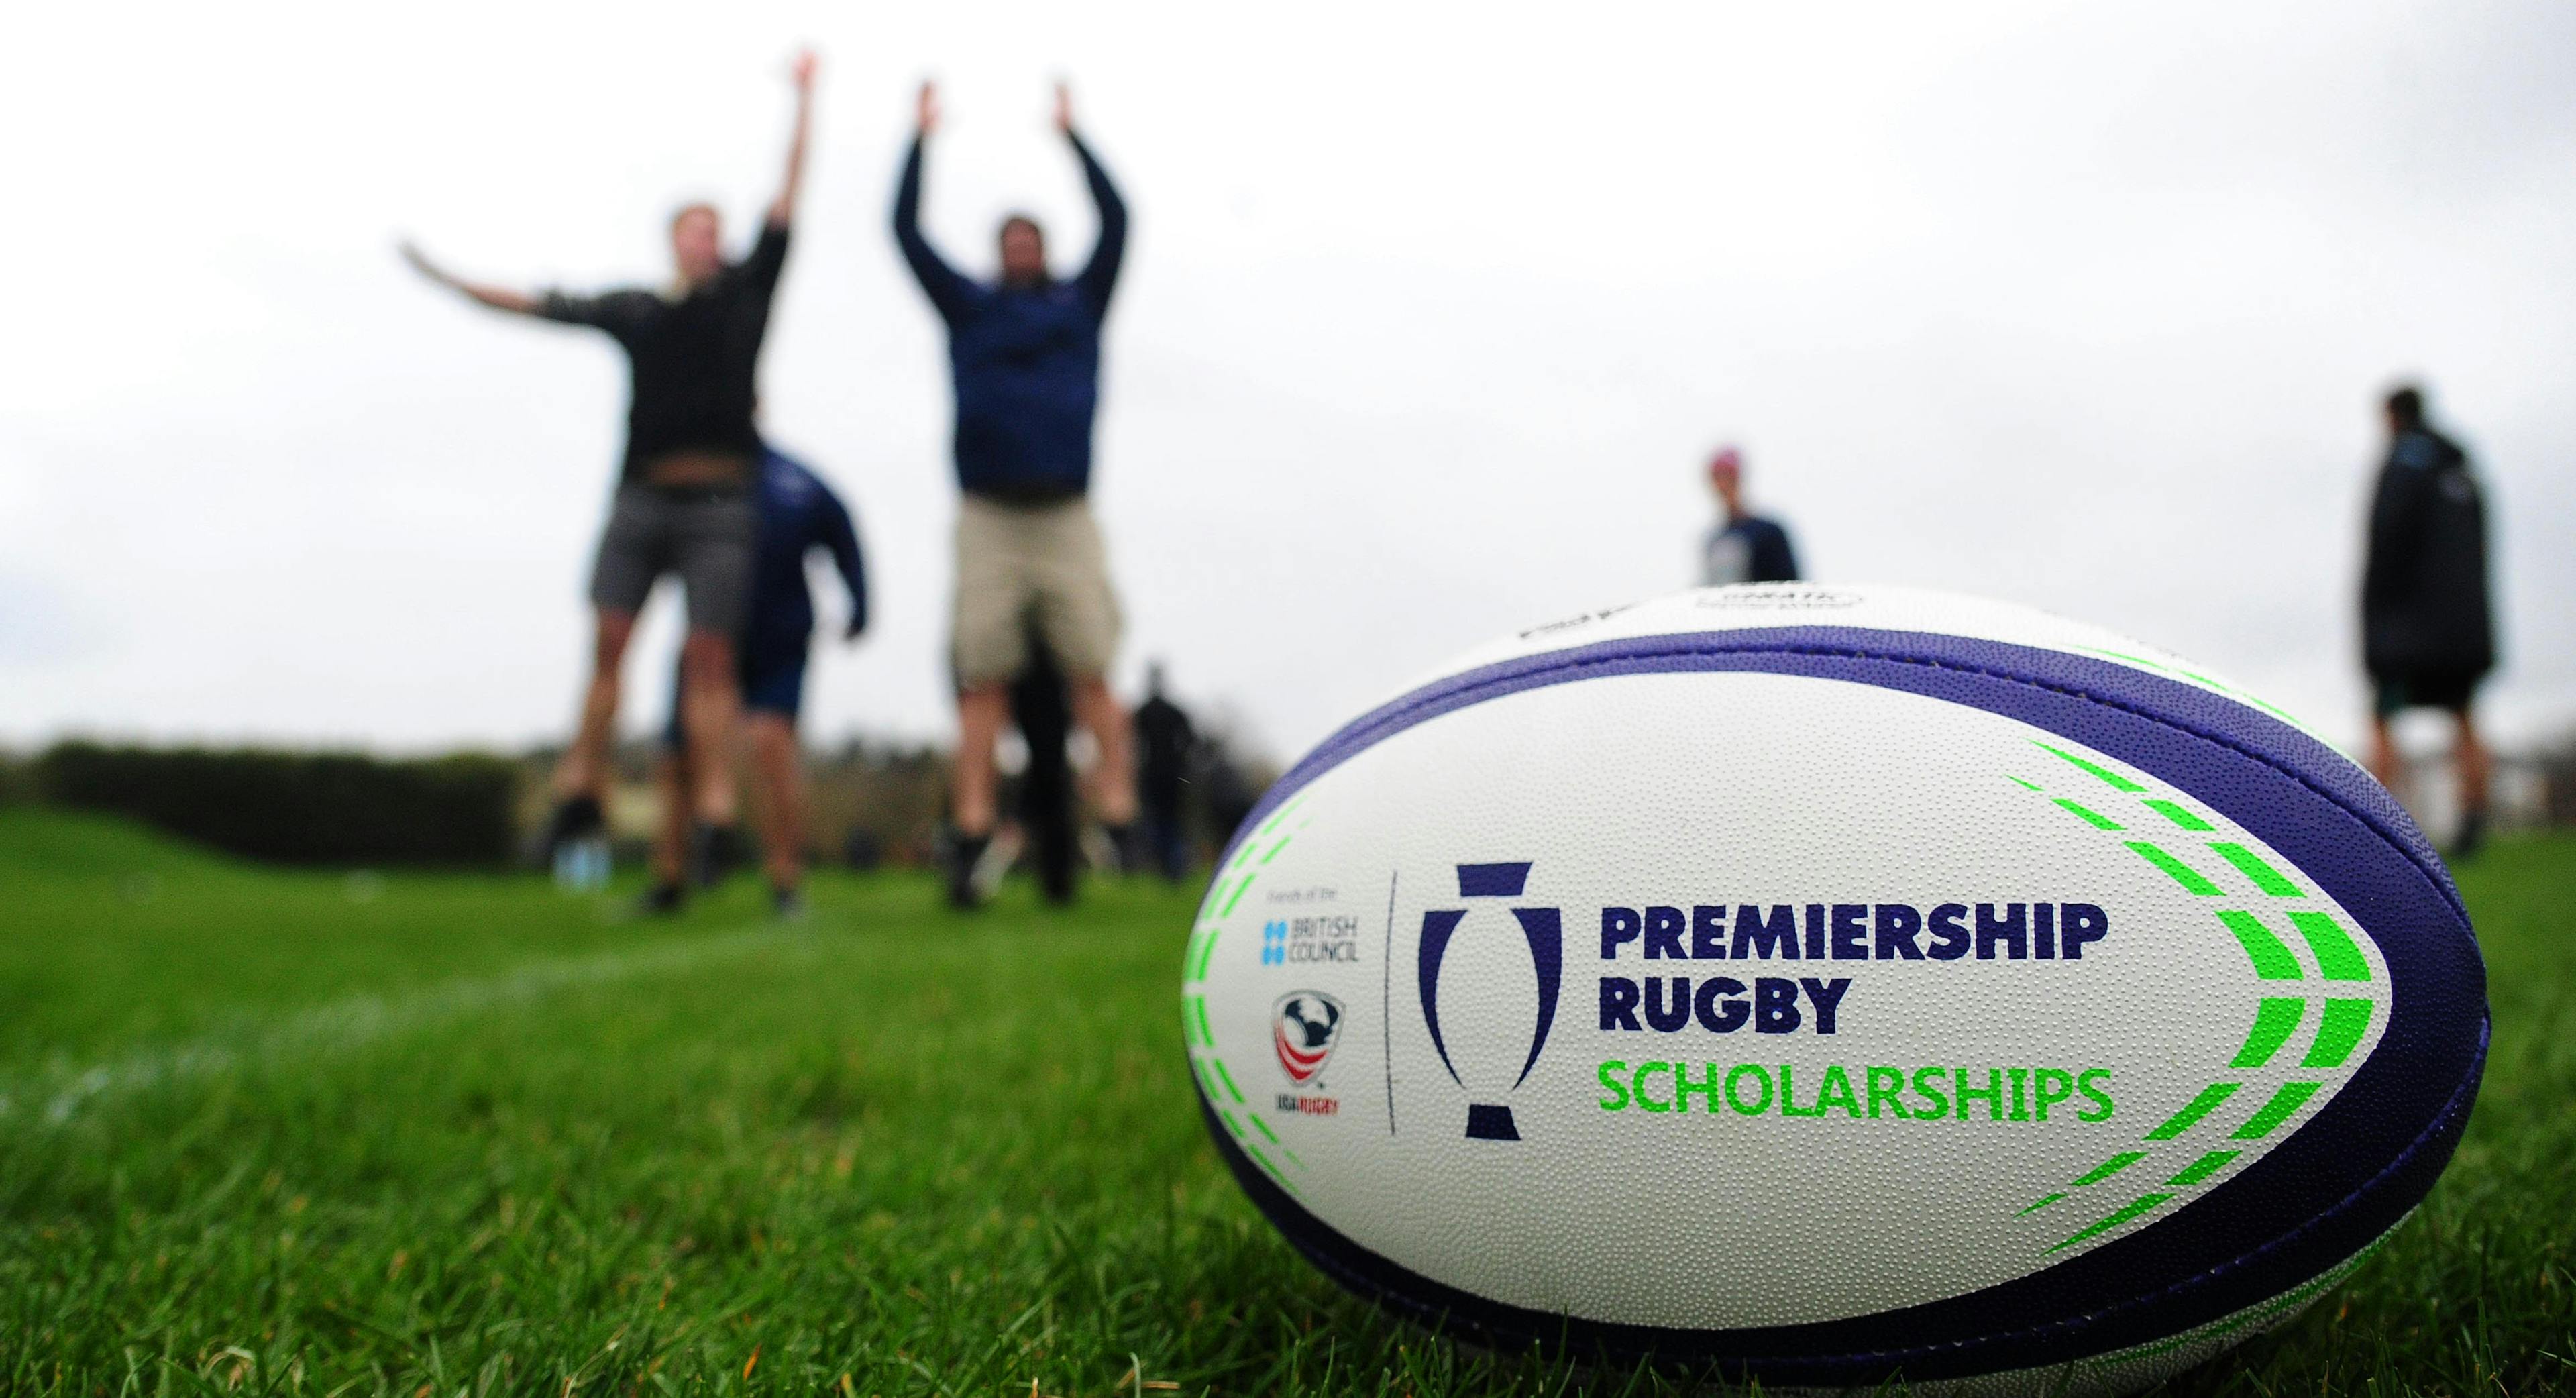 during the Premiership Rugby Scholarship on Tuesday 19 March 2019 at  Bisham Abbey Sports Center - PHOTO: Tom Sandberg/PPAUK